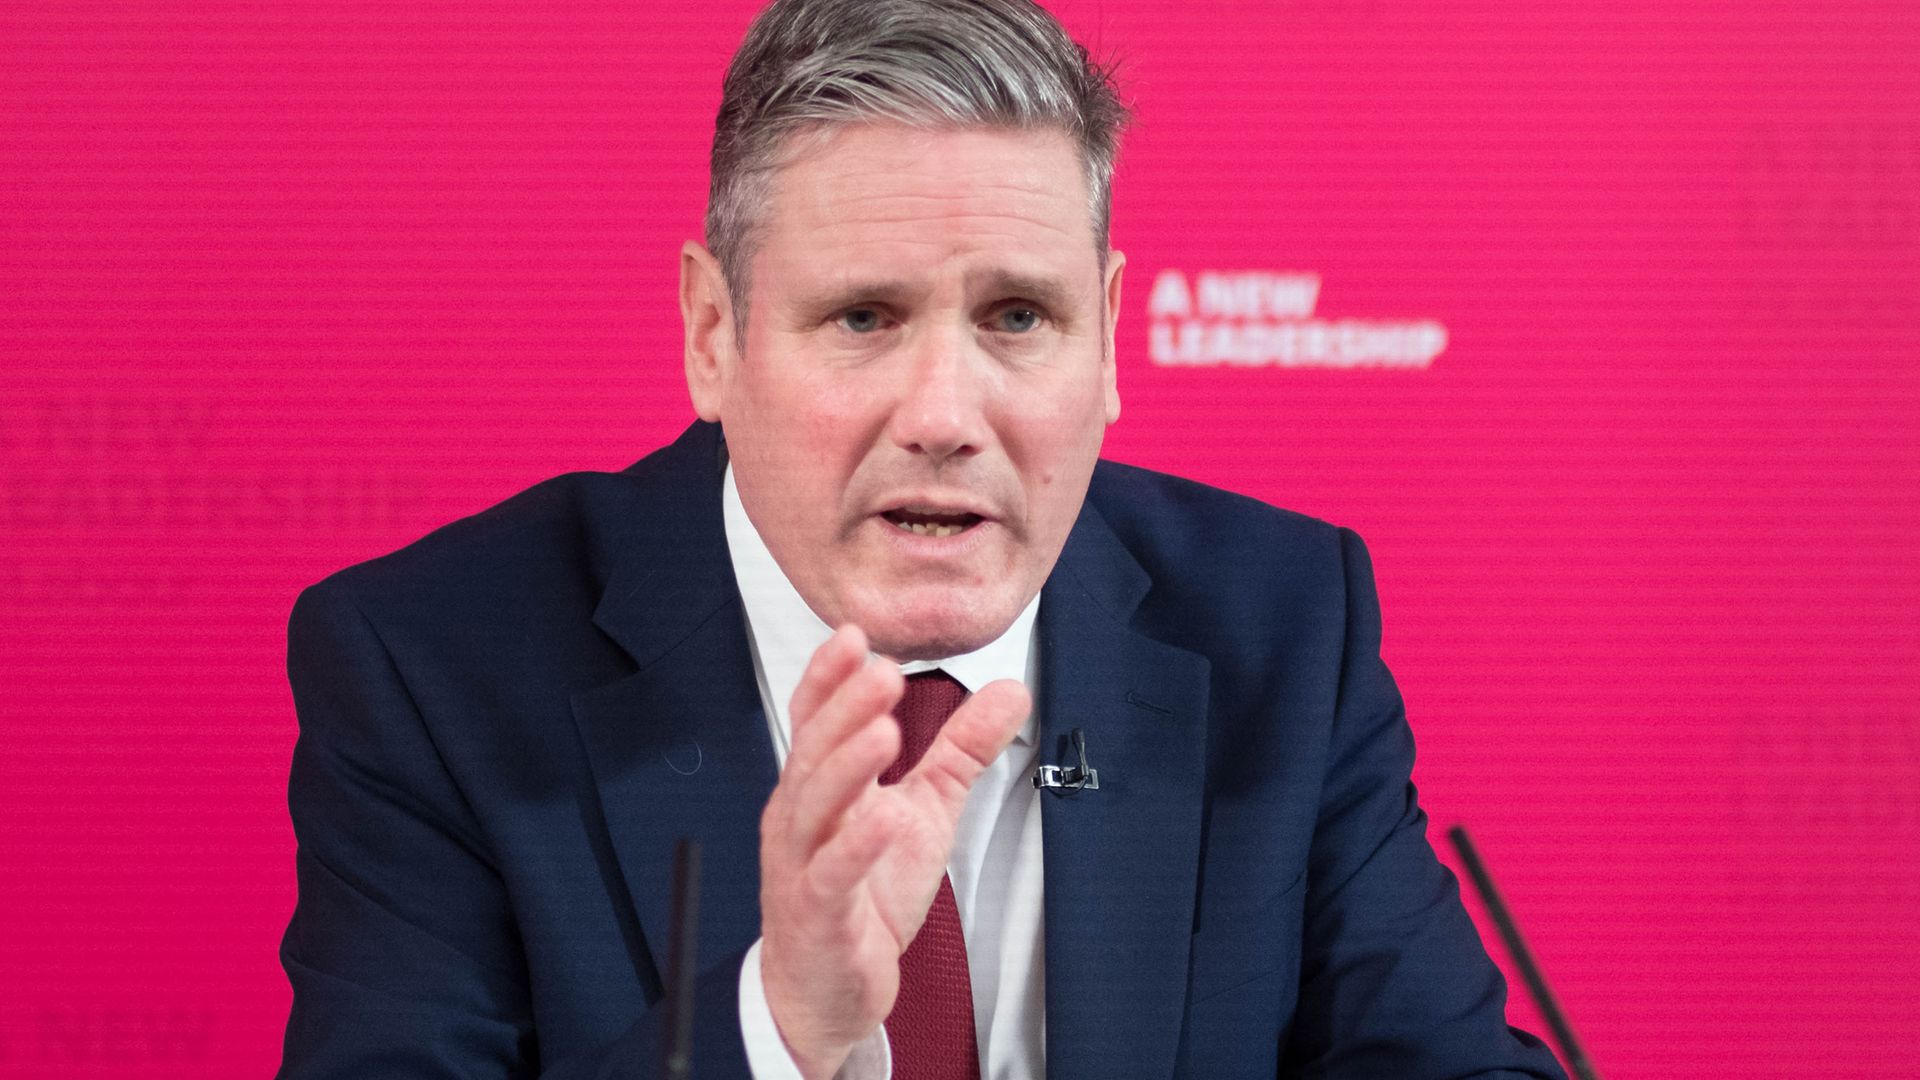 Labour leader Sir Keir Starmer delivers a virtual speech - Credit: PA